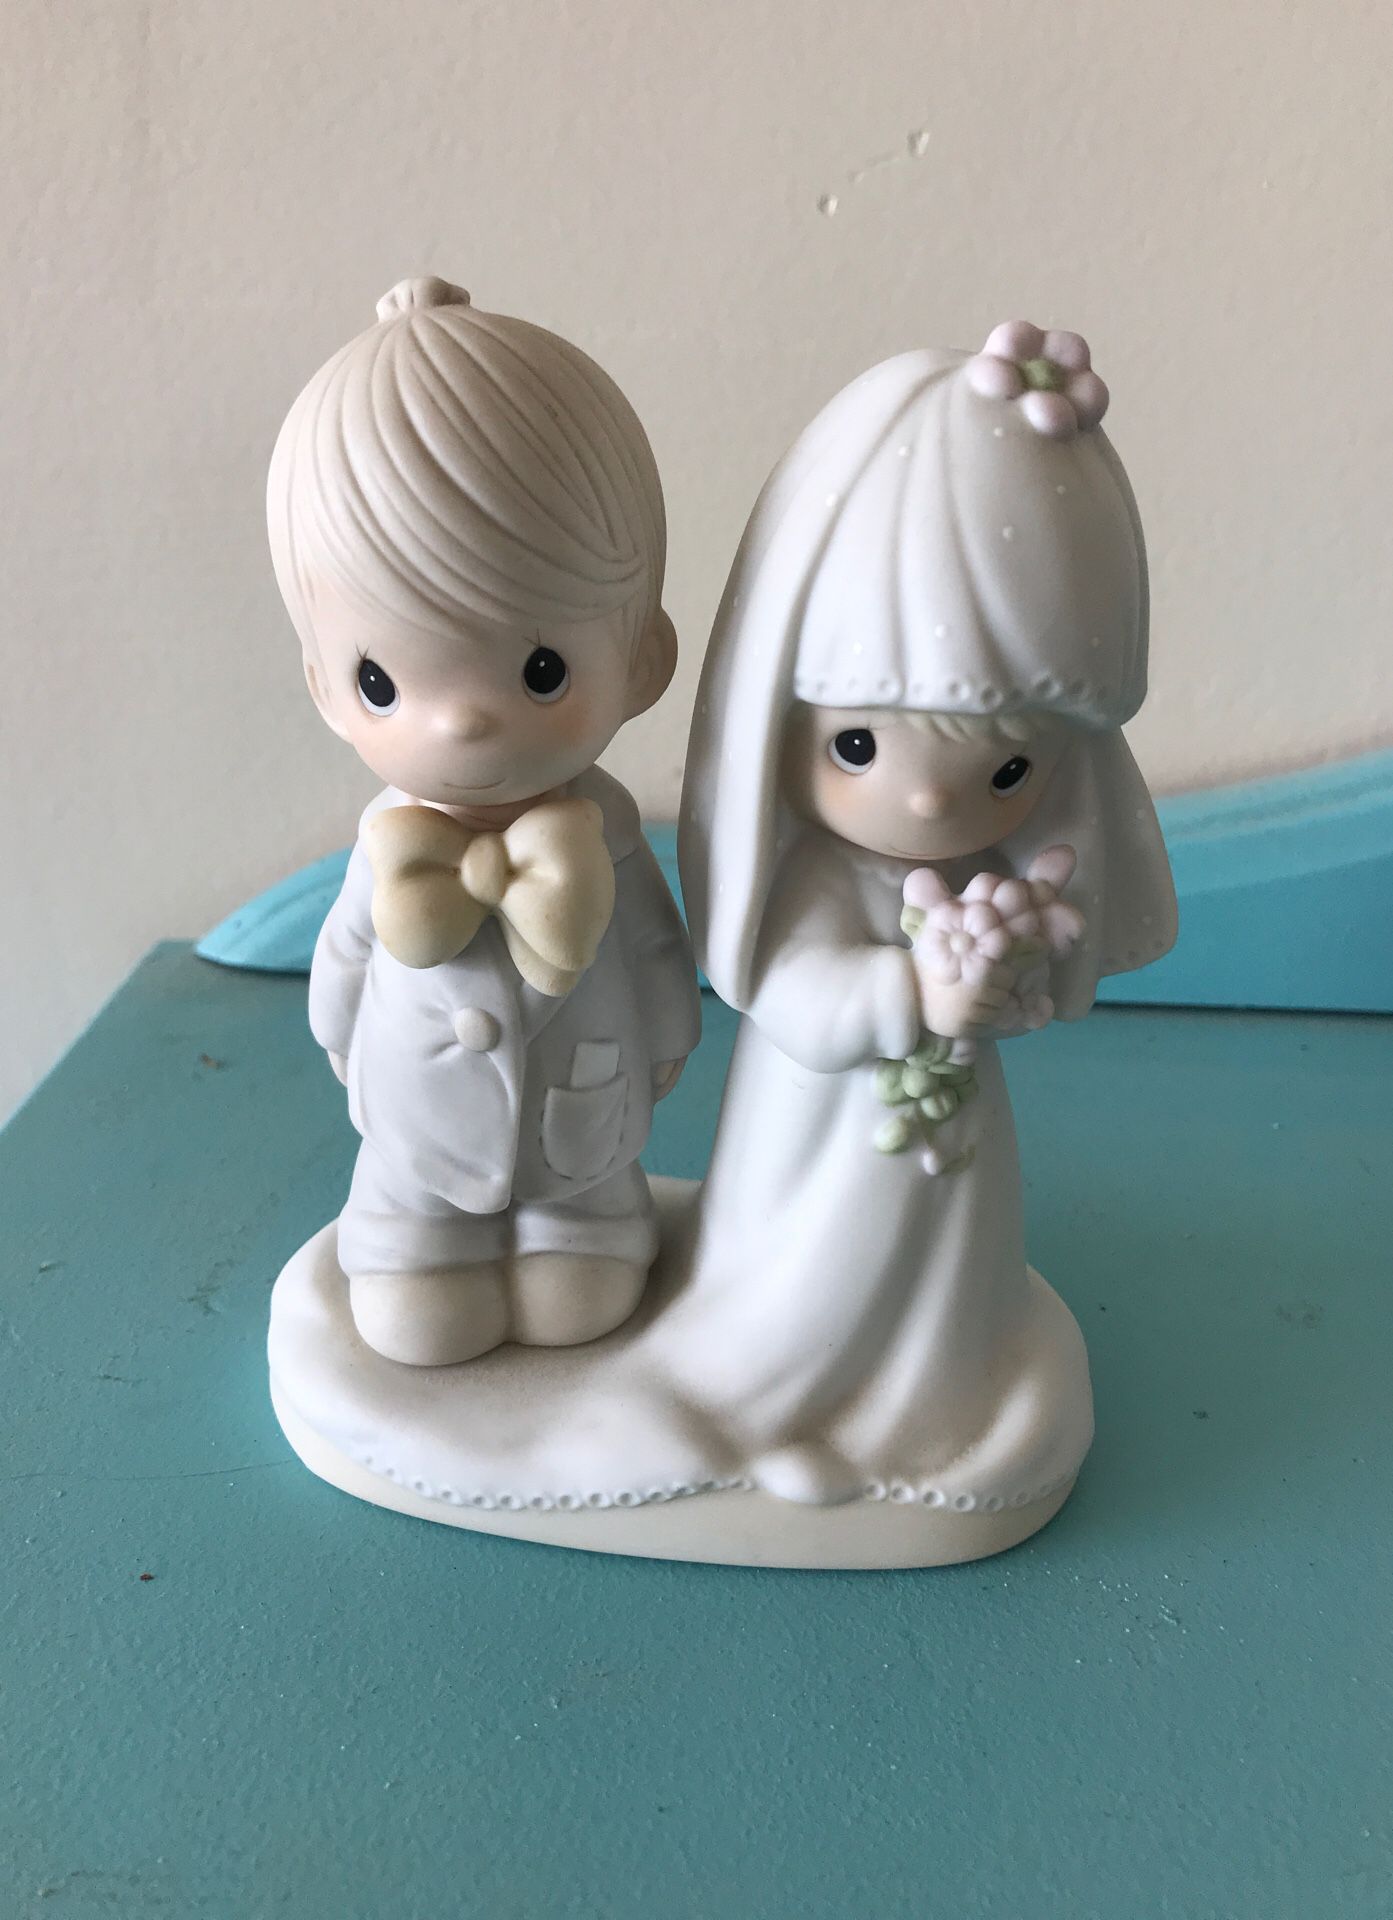 Precious Moments Bride and Groom—would make an adorable cake topper